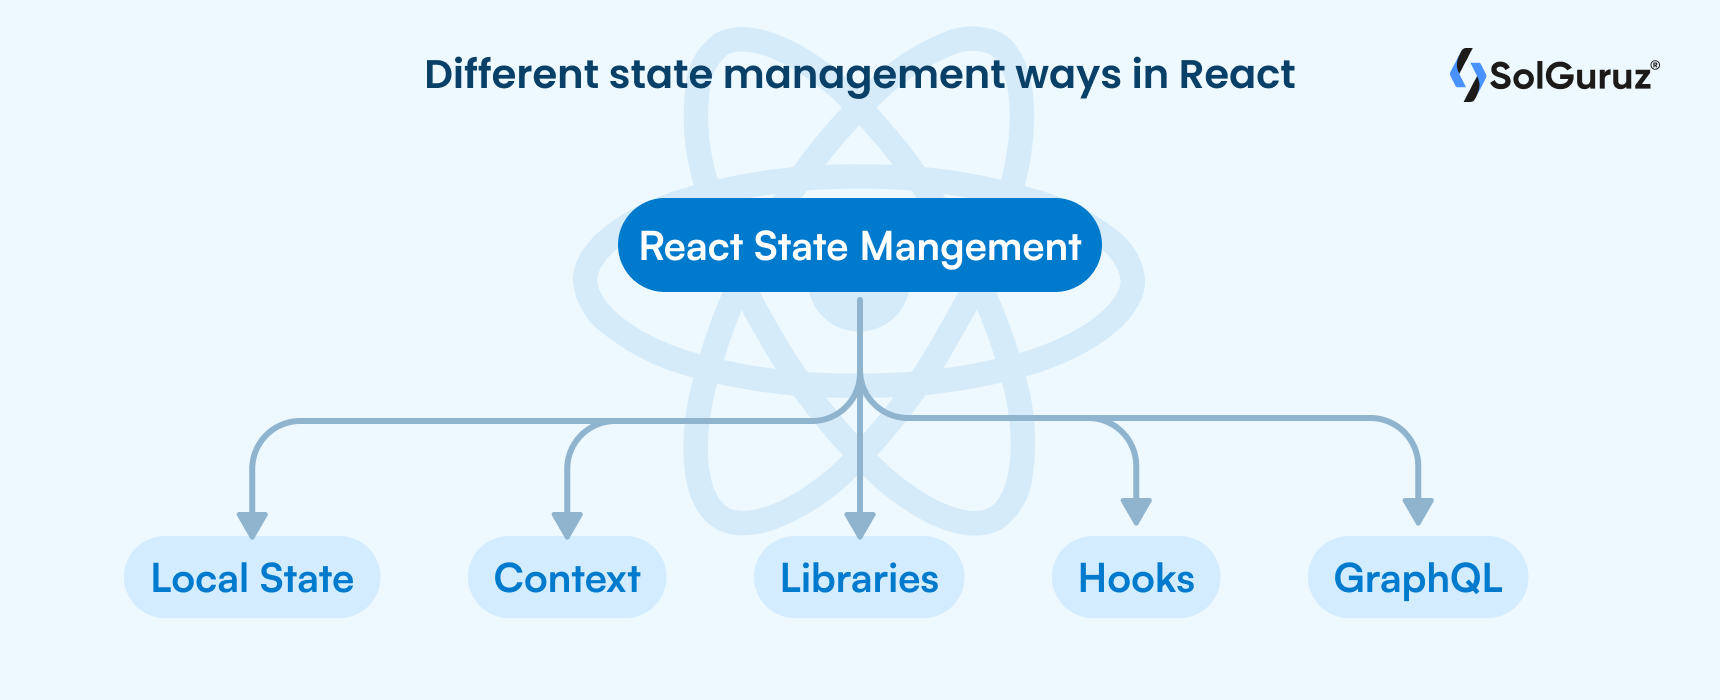 Different ways of State management in React